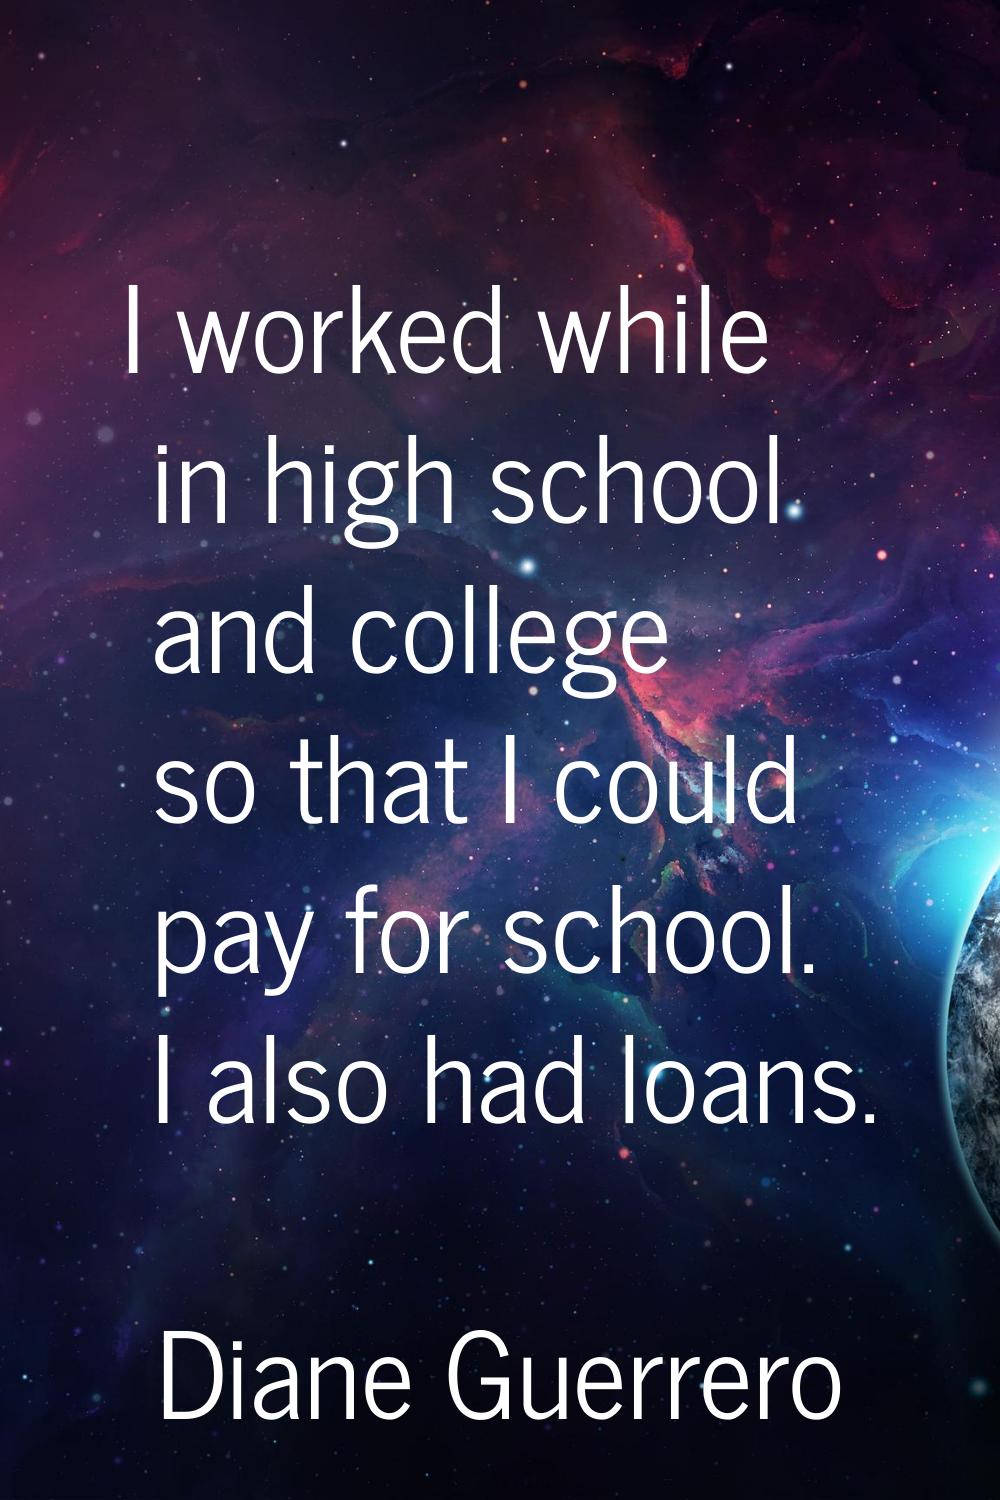 I worked while in high school and college so that I could pay for school. I also had loans.